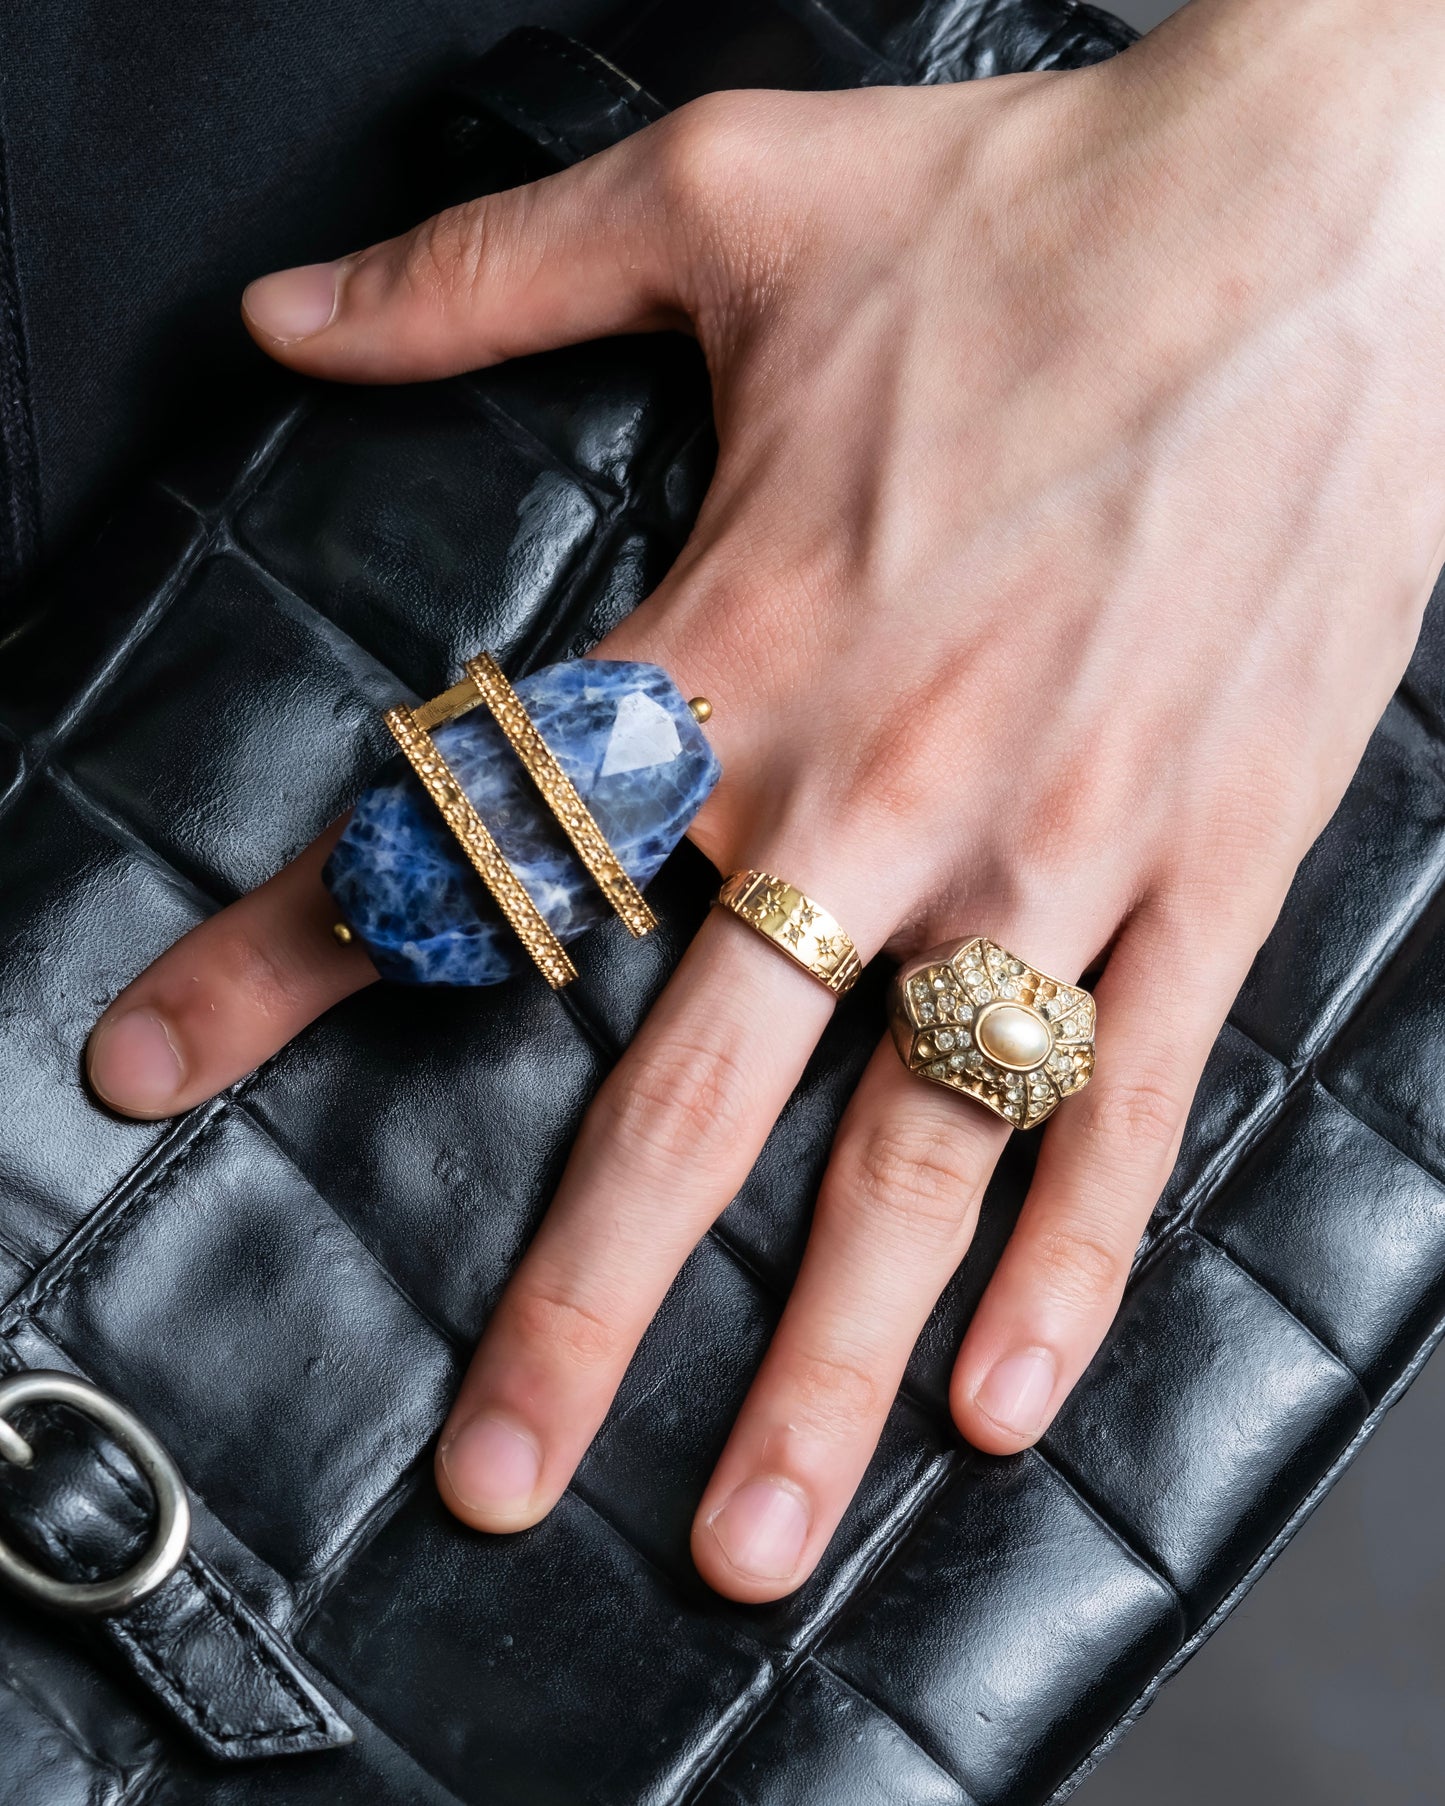 "Christian Dior" Sodalite Stone Gold Accent Ring